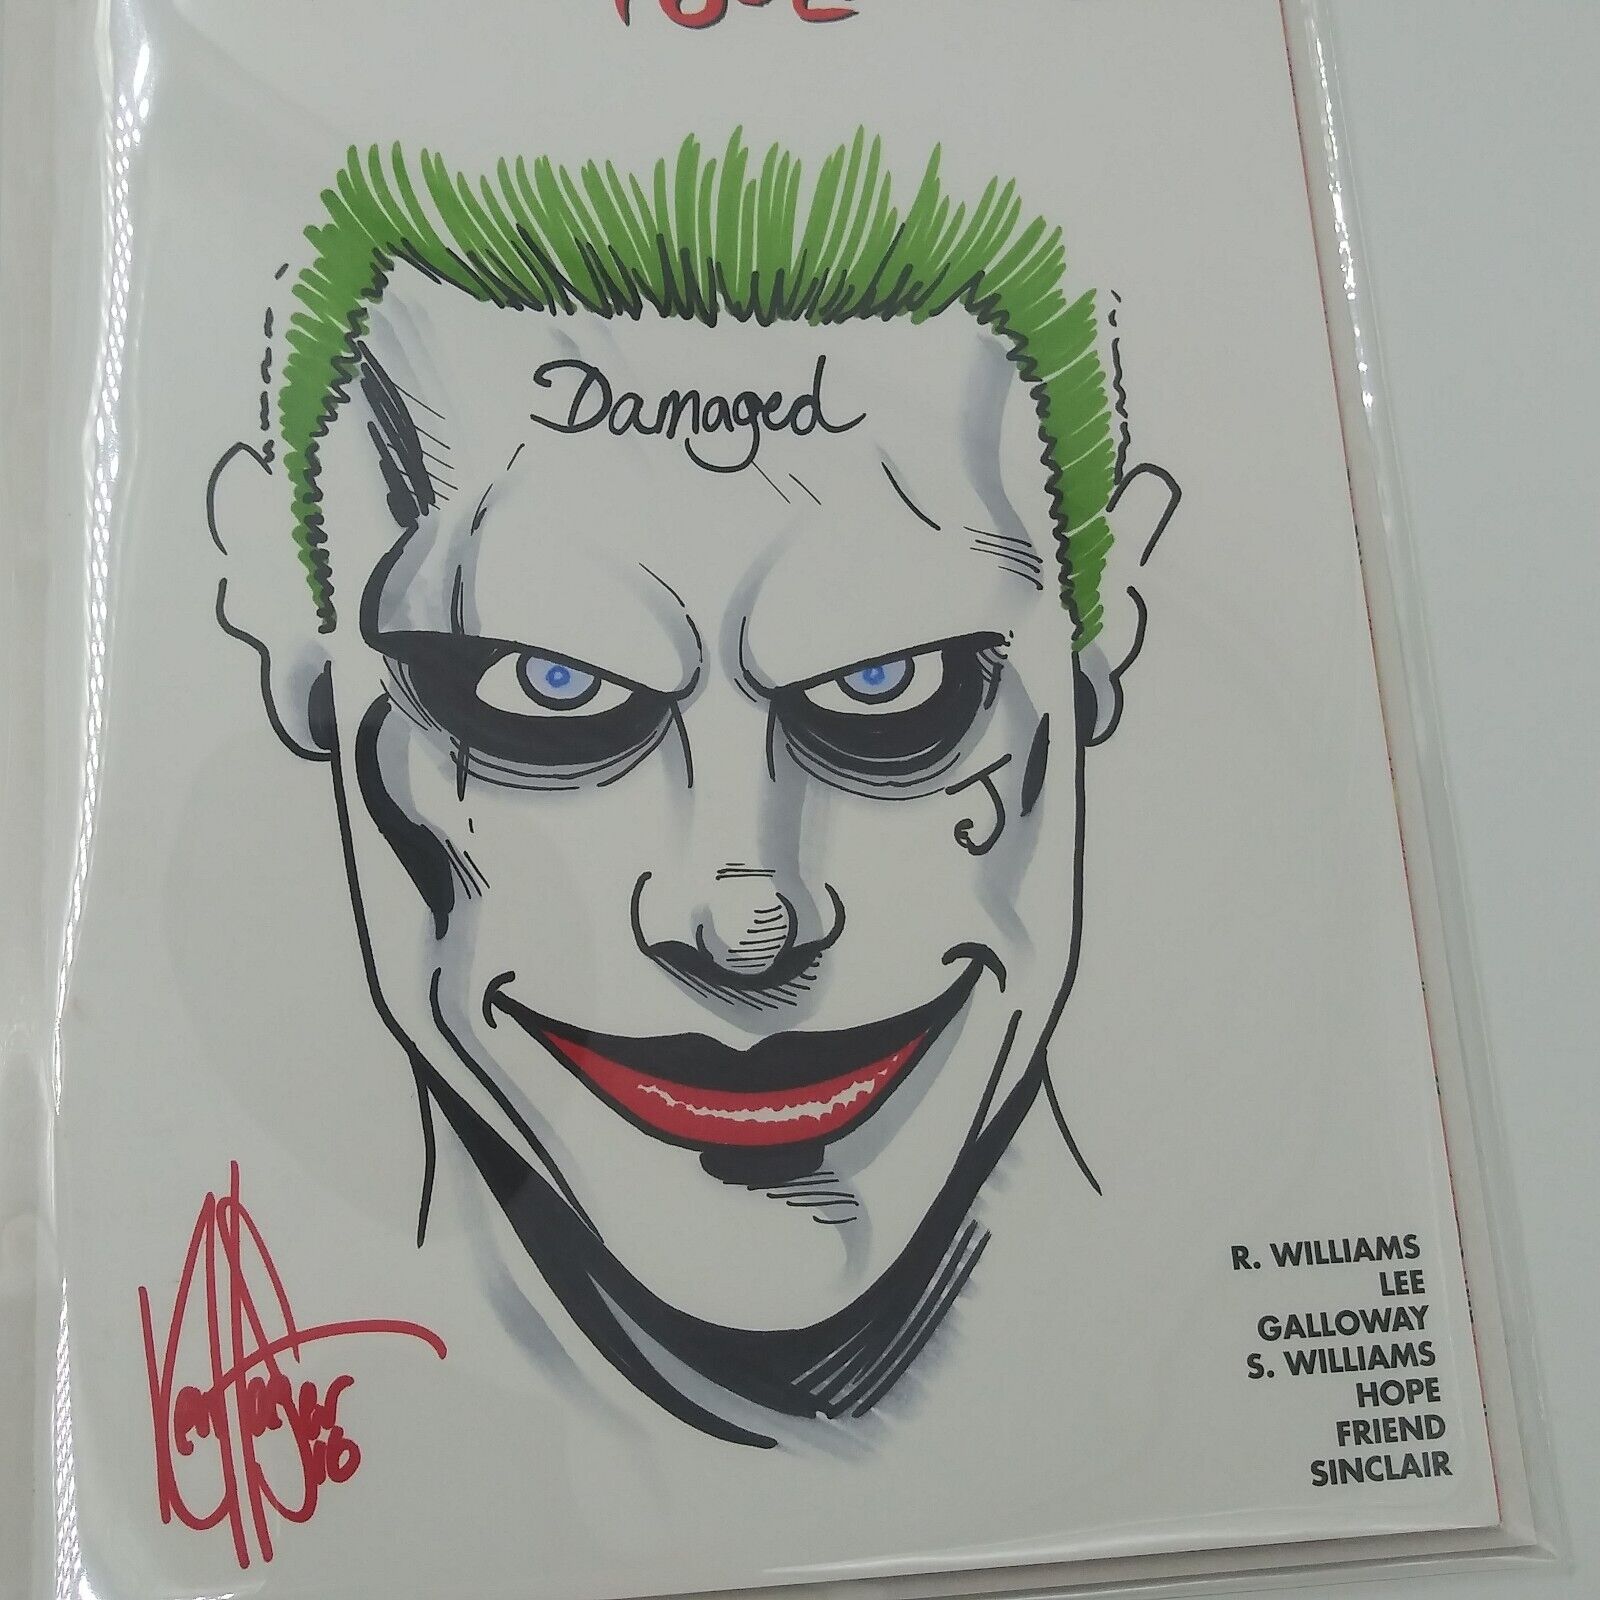 charlie lipman recommends the joker and harley quinn drawing pic